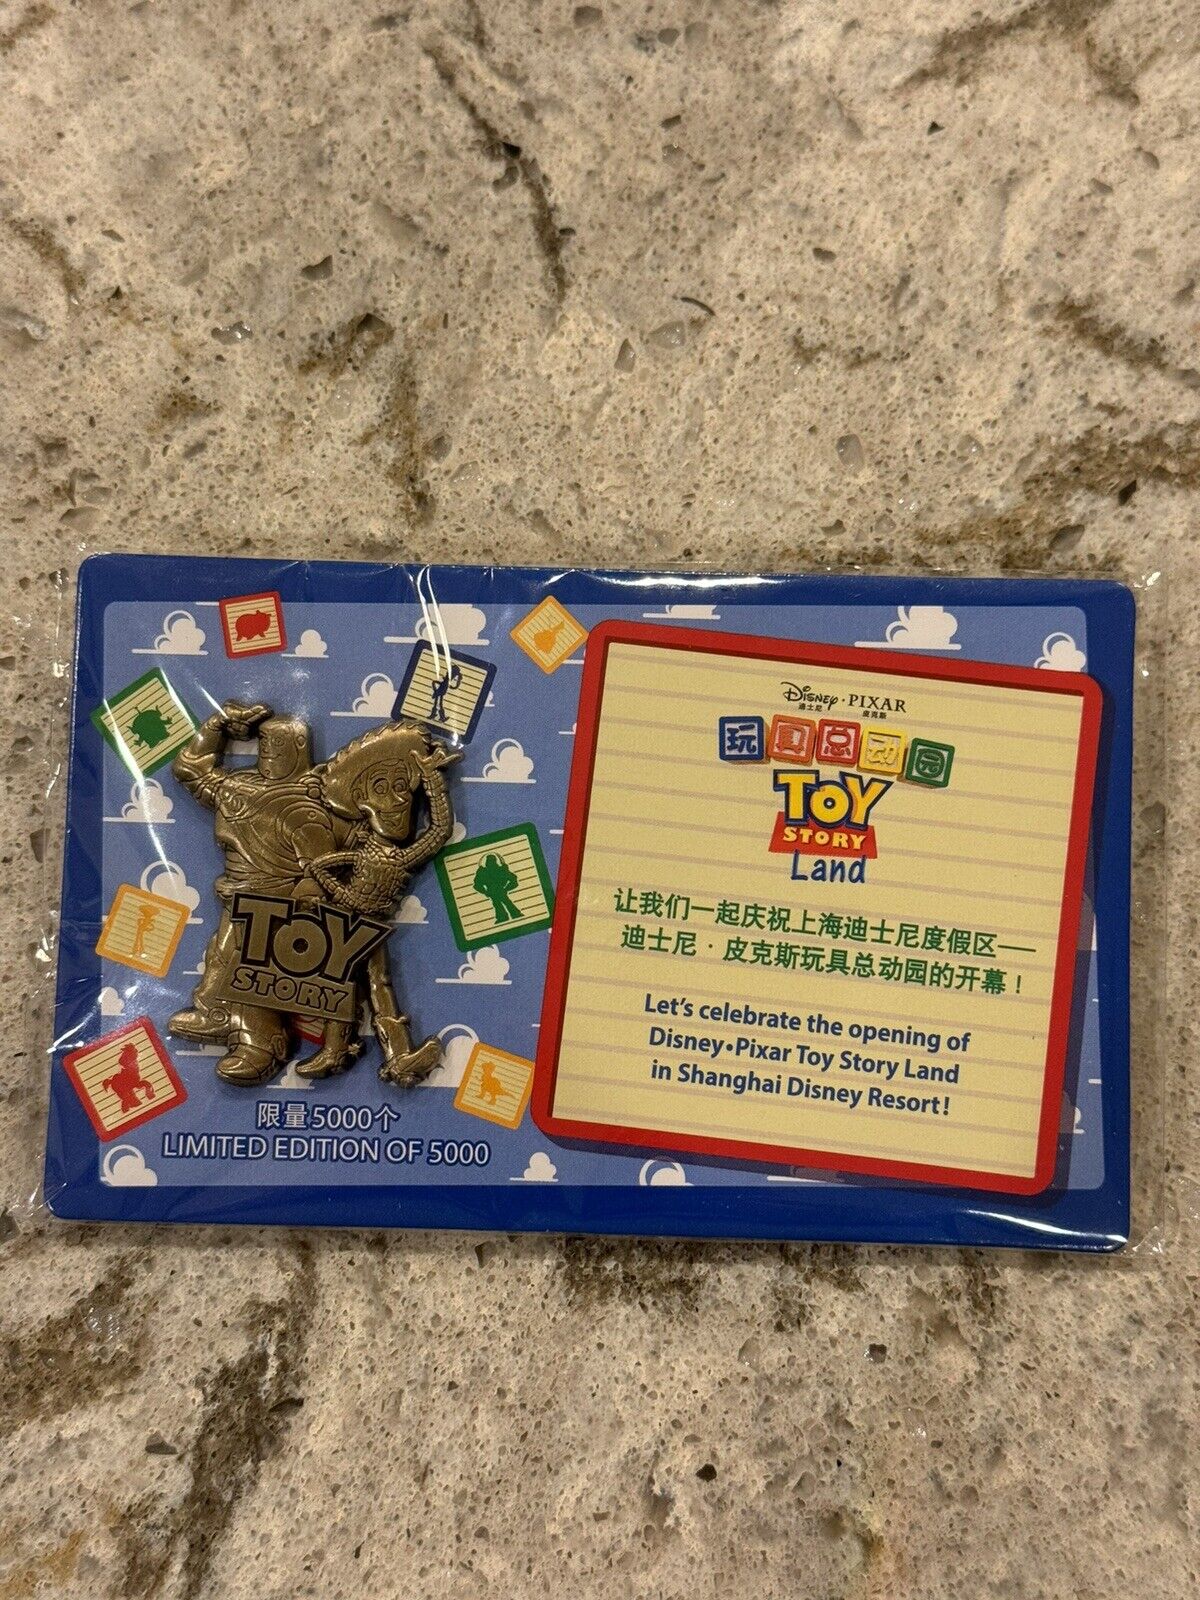 Disney Shanghai Resort Toy Story Land Grand Opening Pin LE5000 Very Rare NEW